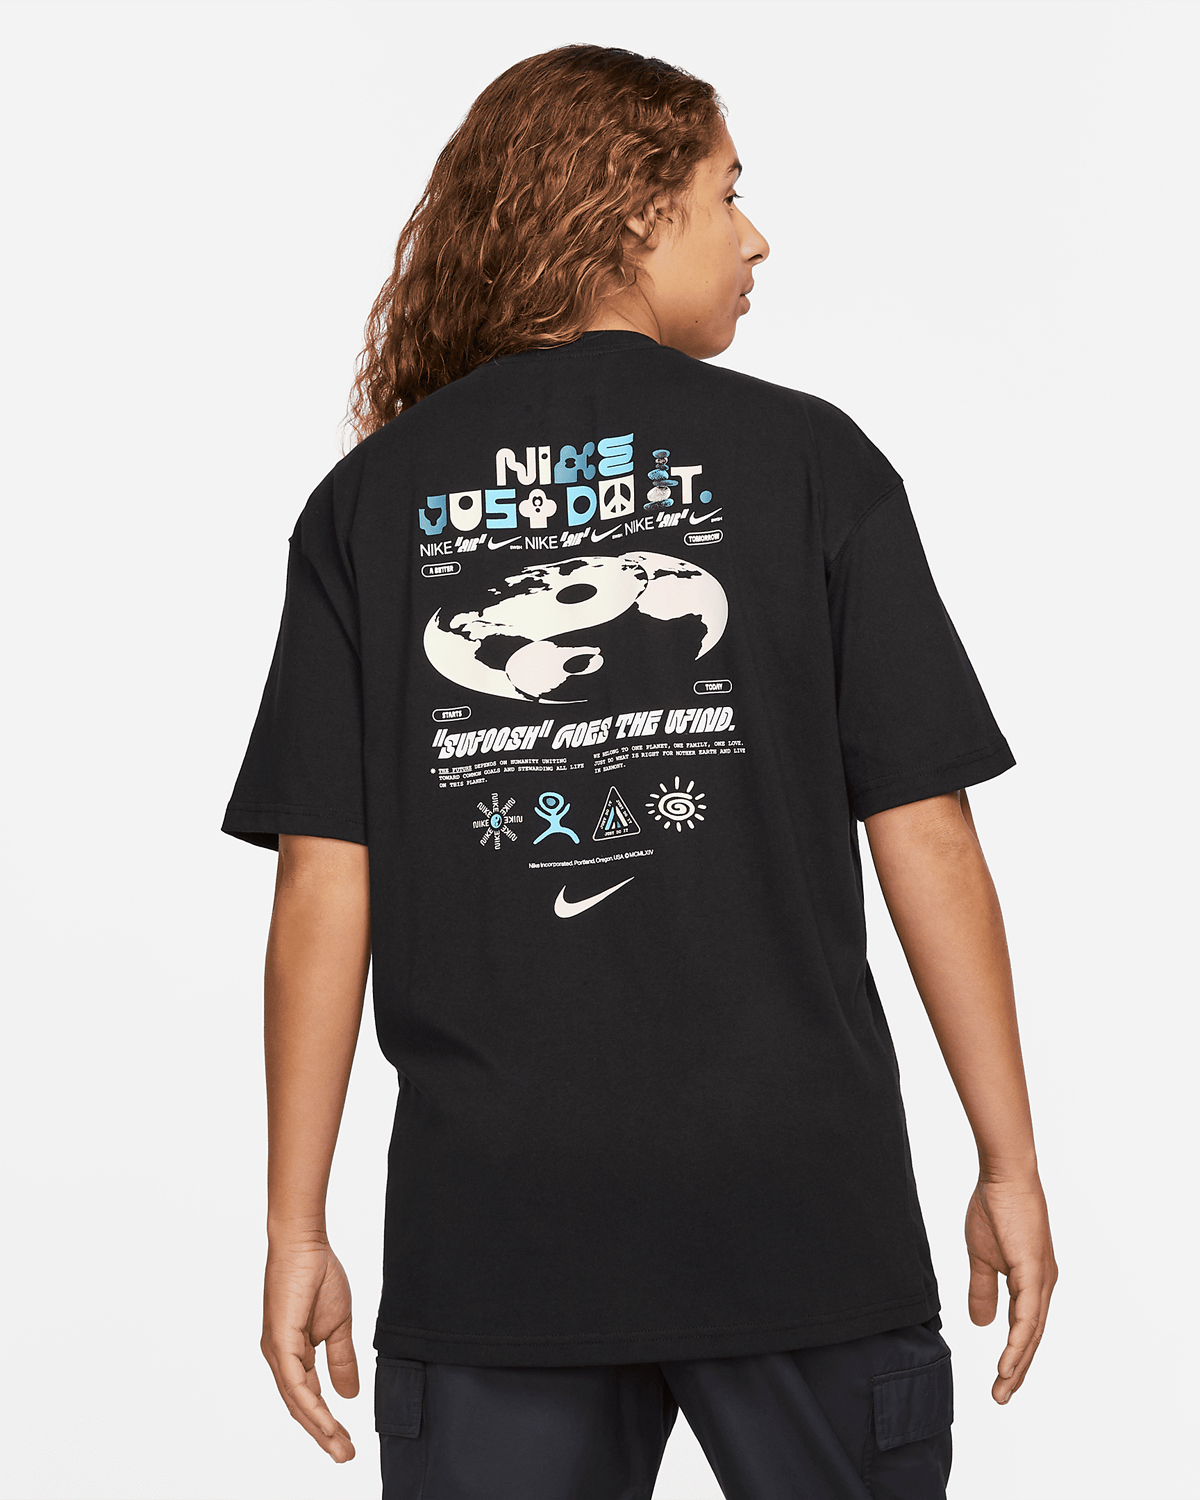 Nike-Air-Force-1-Low-Tiffany-and-Co-T-Shirt-Match-2